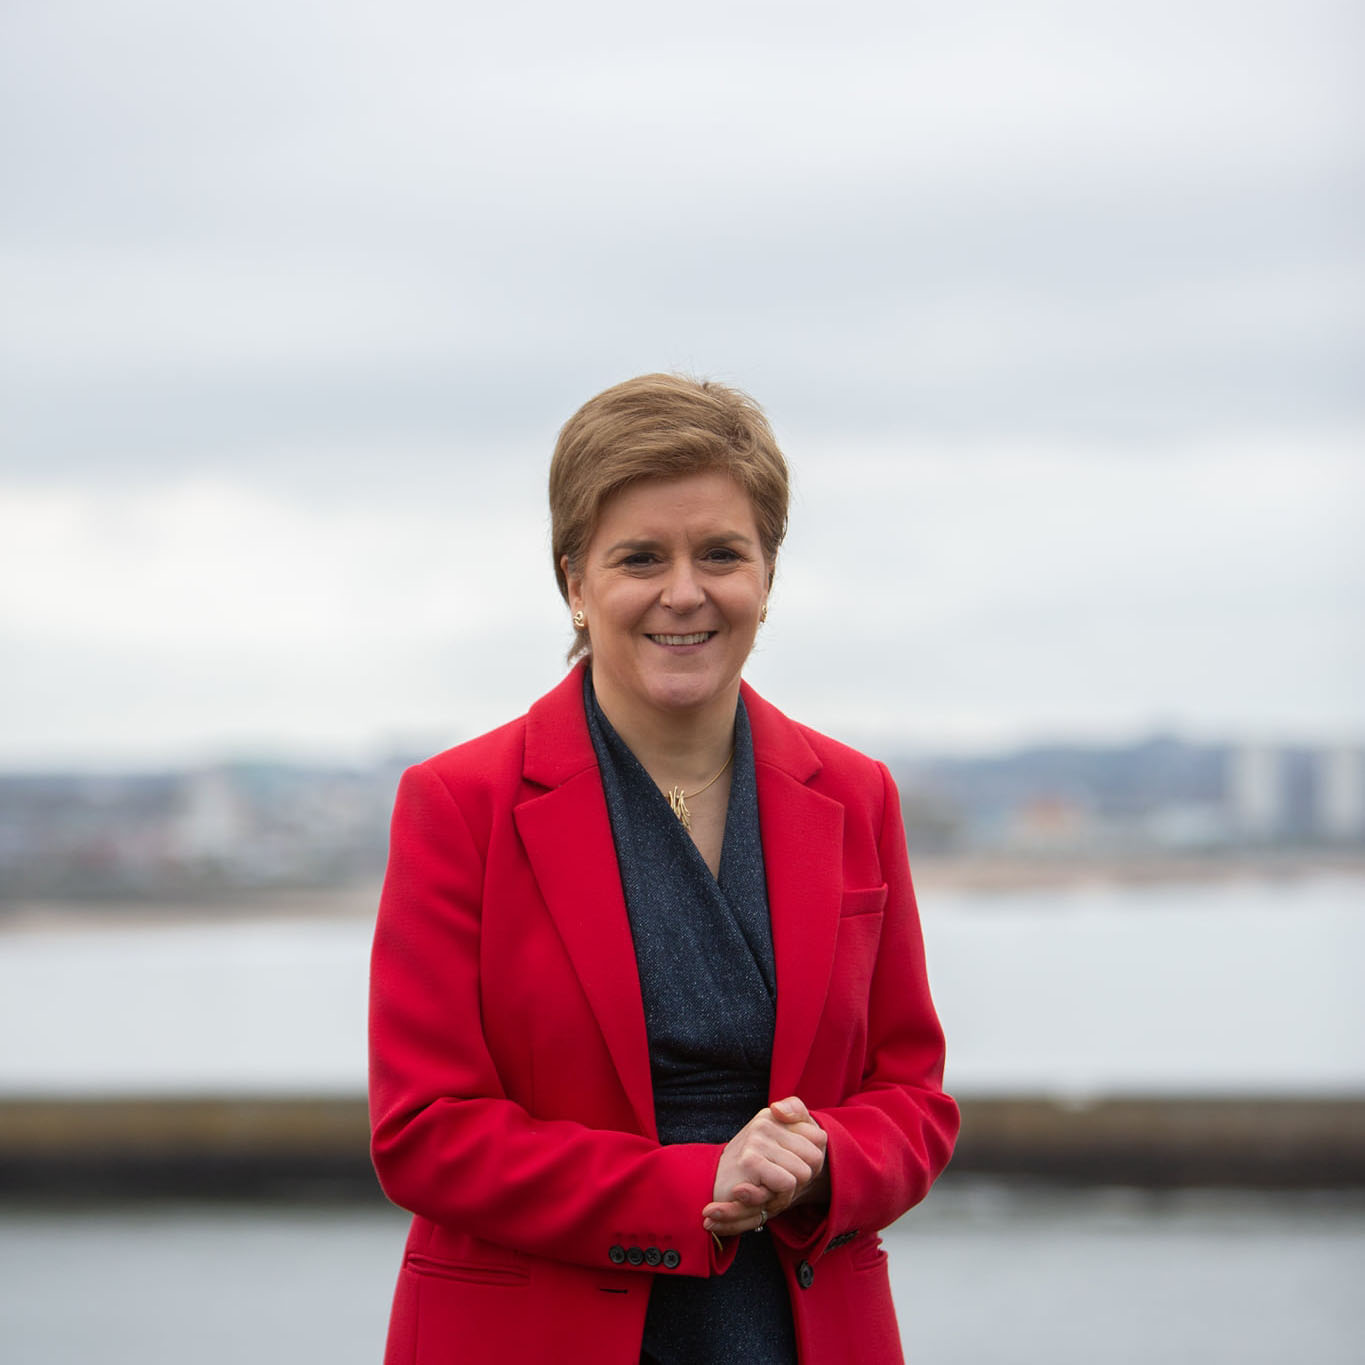 First Minister